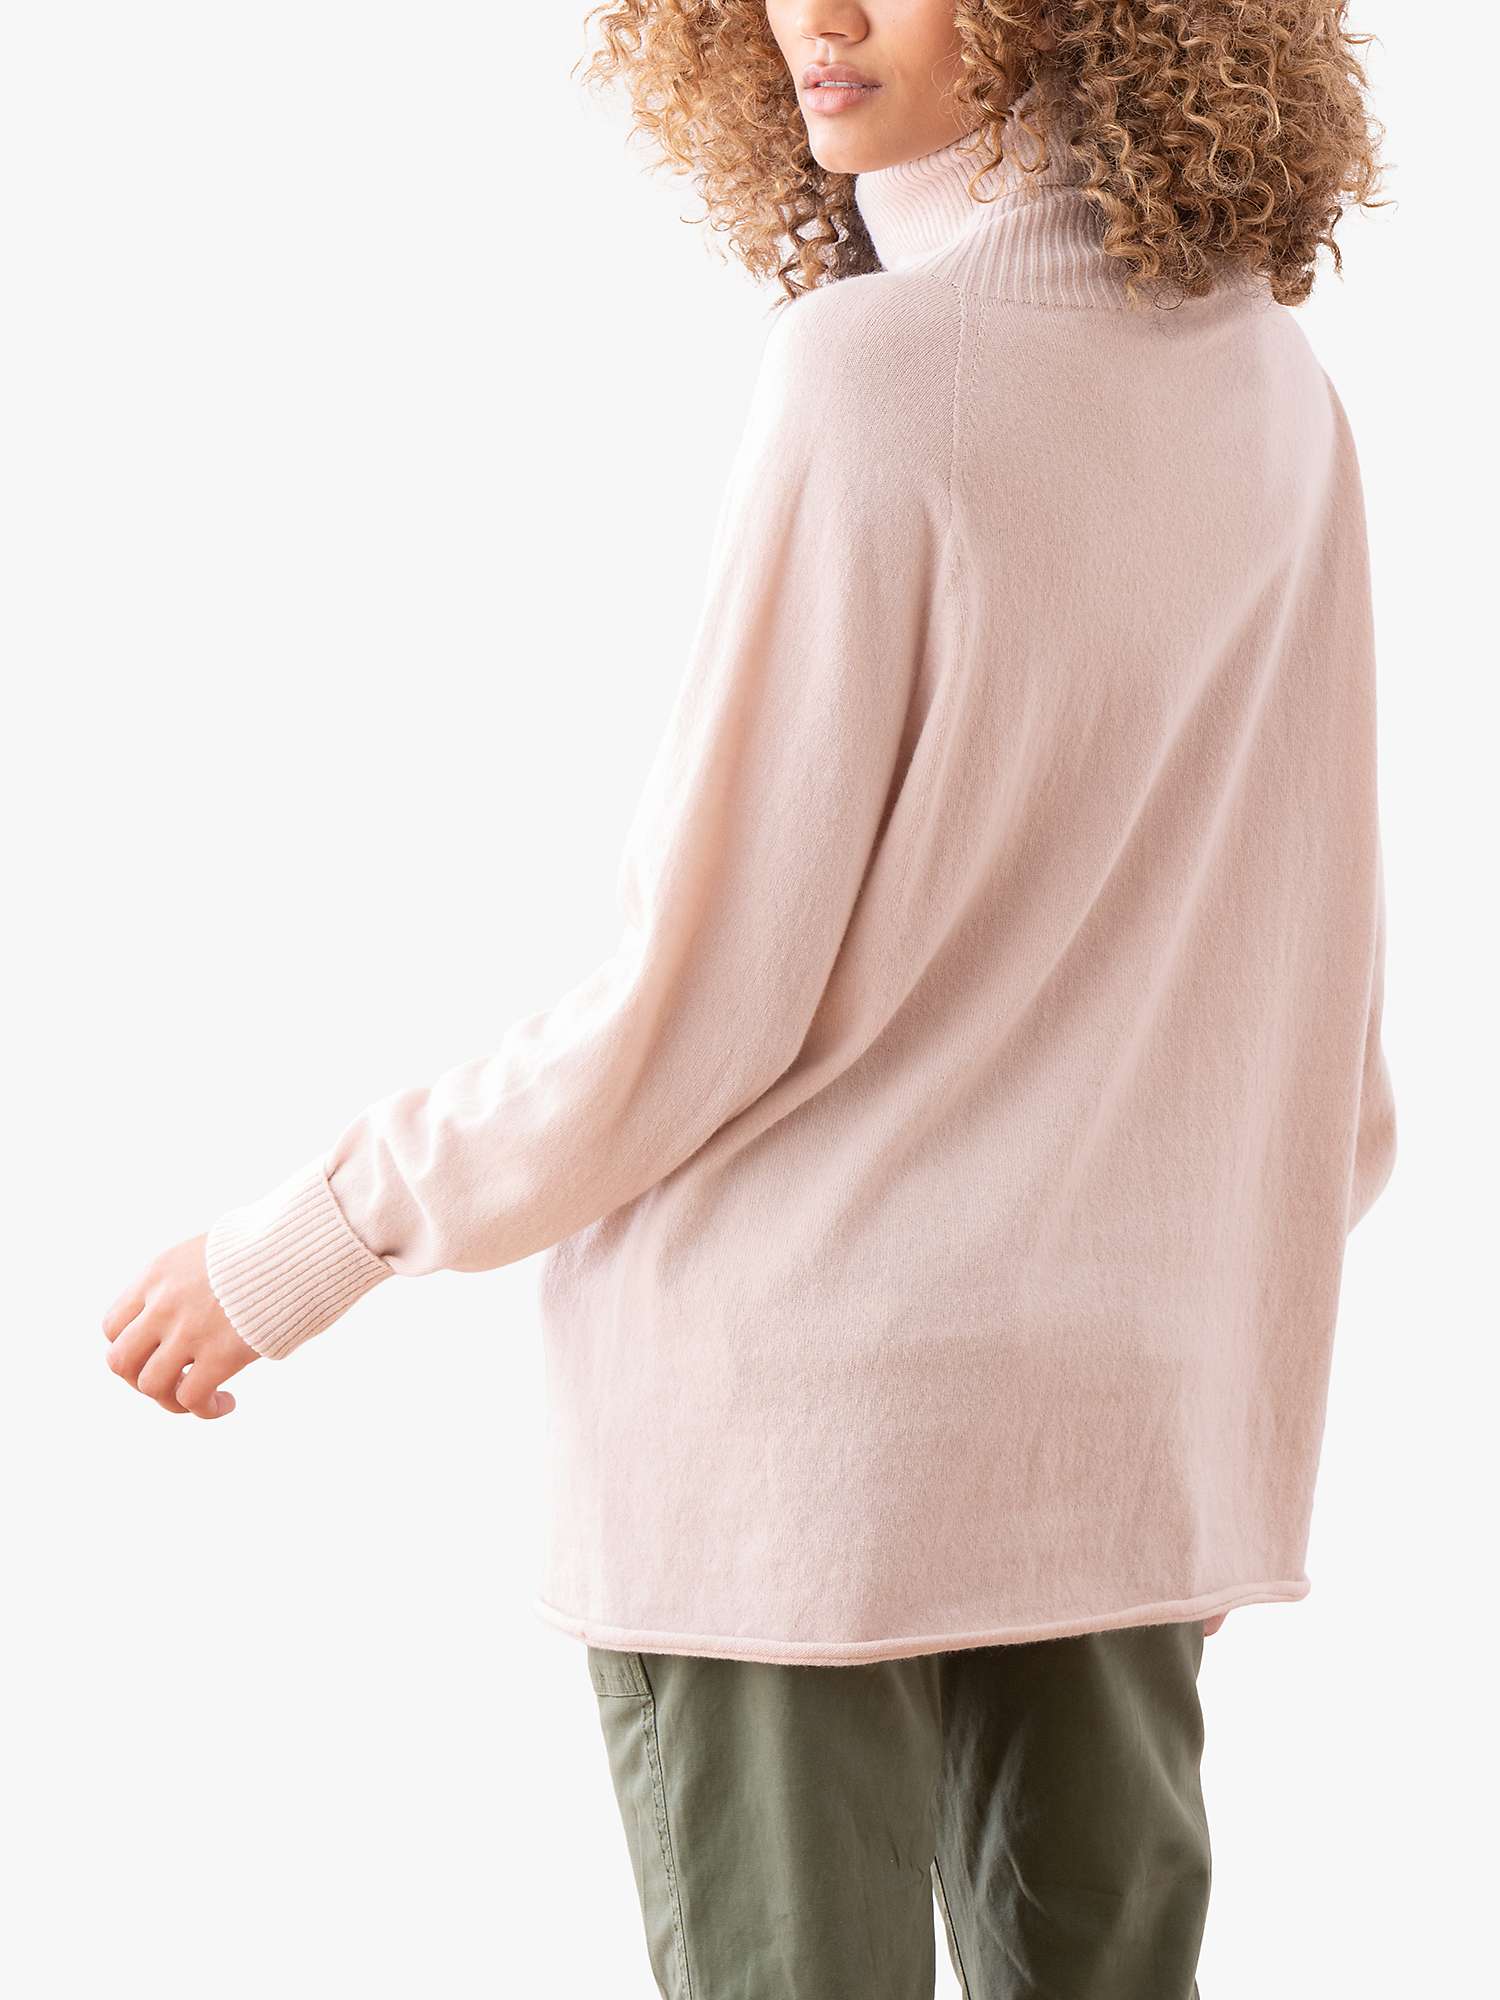 Buy Celtic & Co. Geloong Slouch Jumper, Peony Online at johnlewis.com